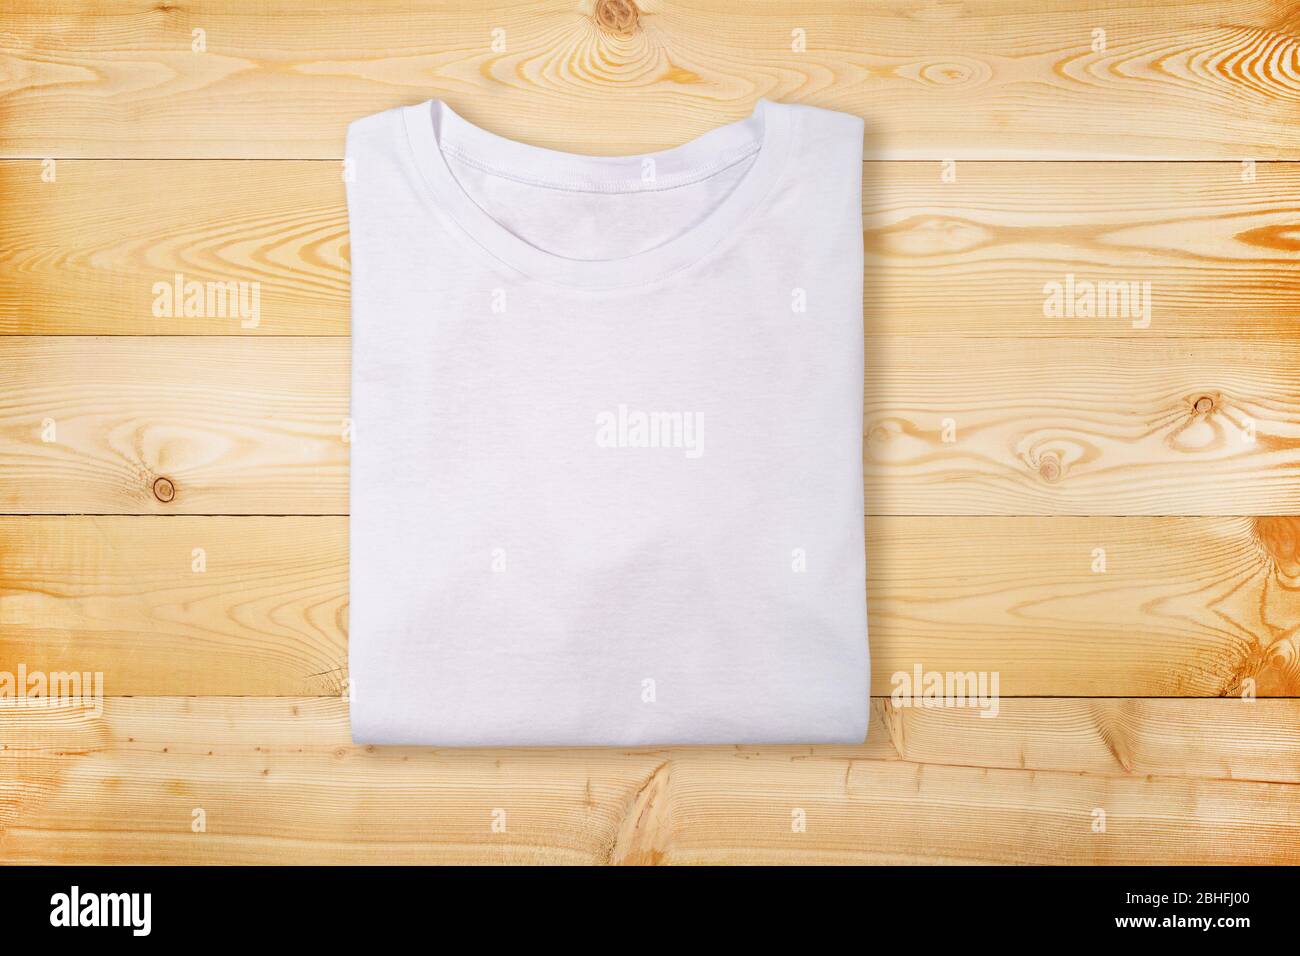 Blank white folded t-shirt on wooden background. Plain white tshirt on natural wooden texture Stock Photo